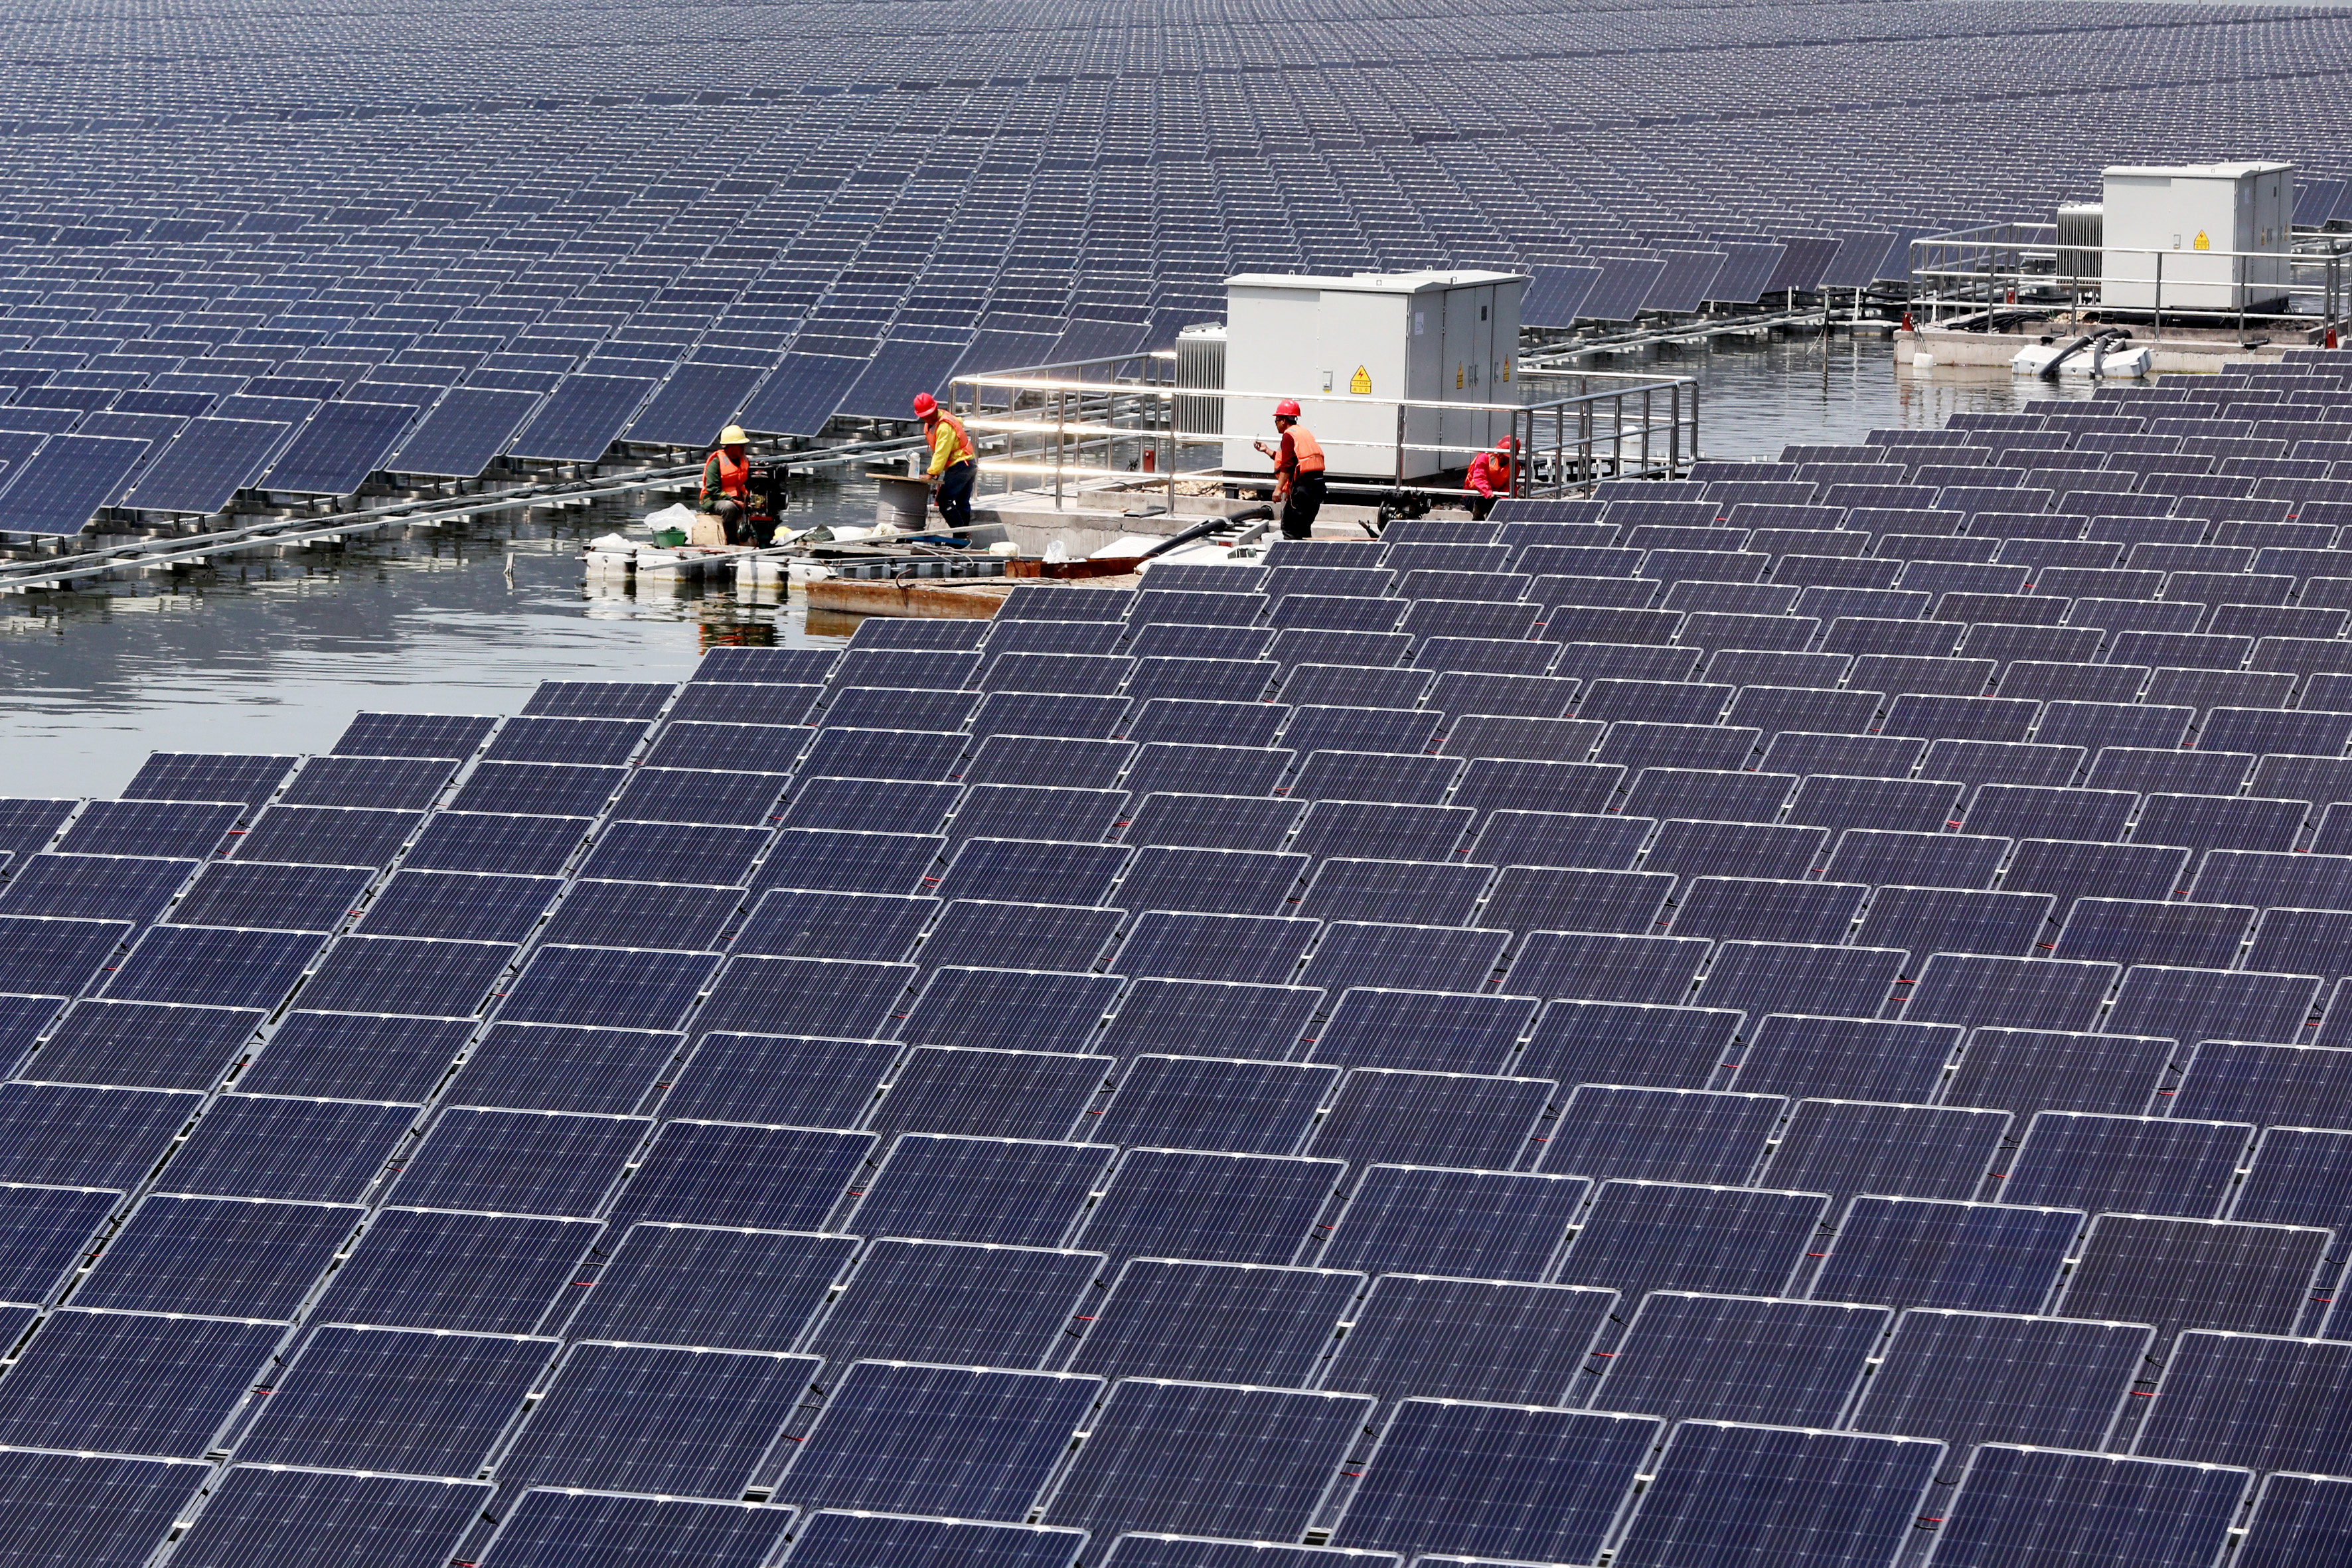 Solar panels are seen at a floating solar plant in Huaibei